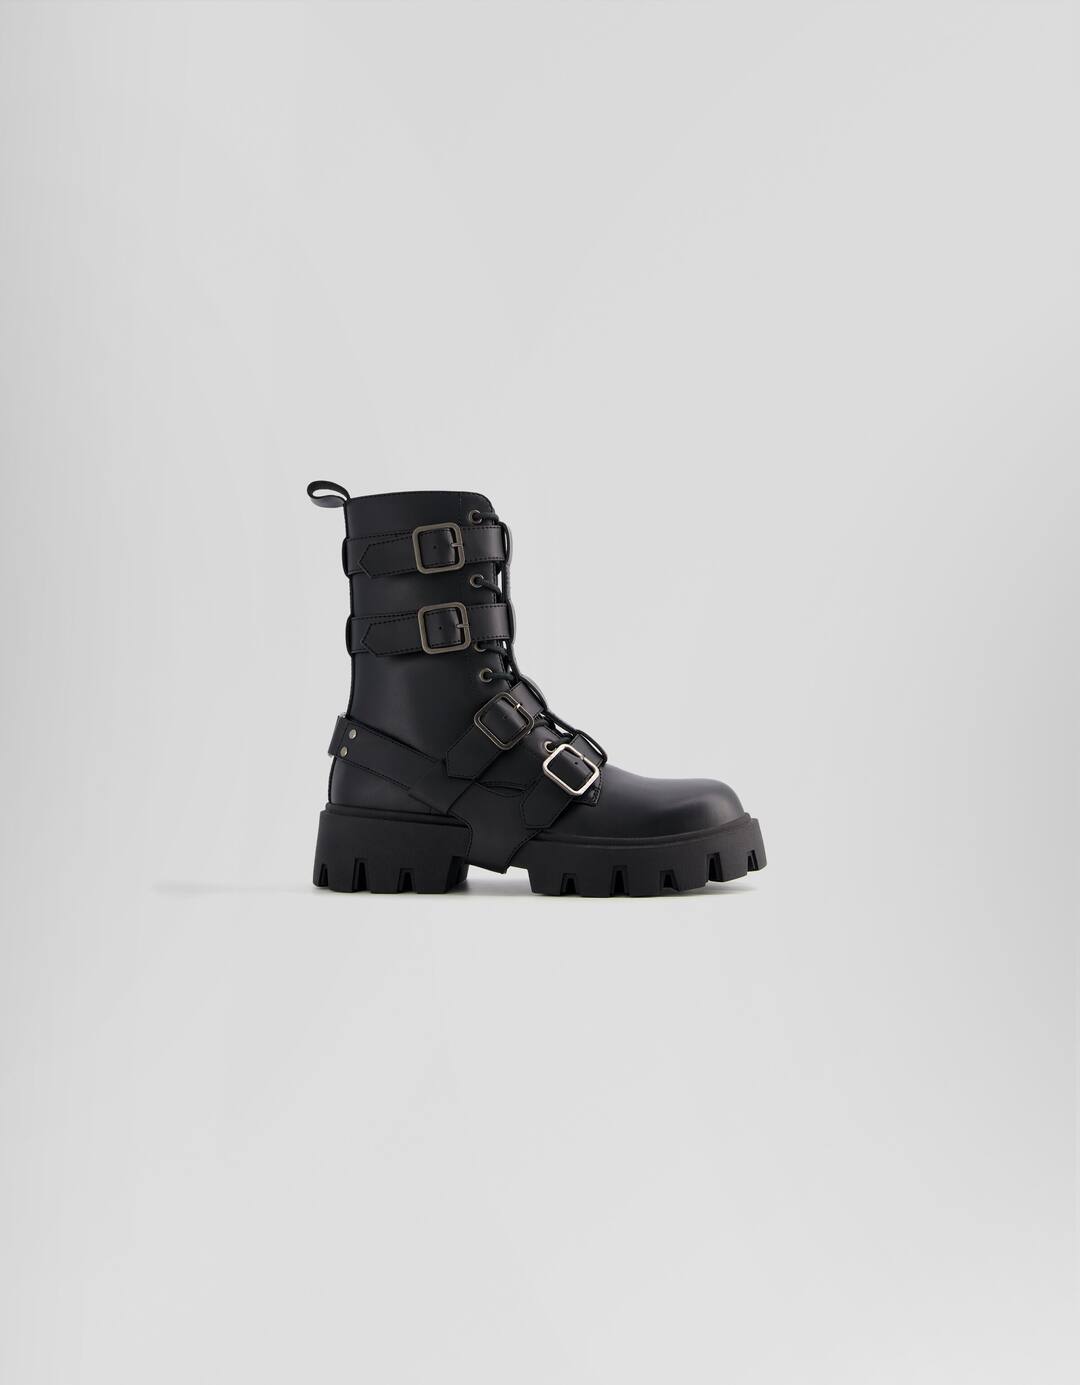 Men’s ankle boots with removable harness detail